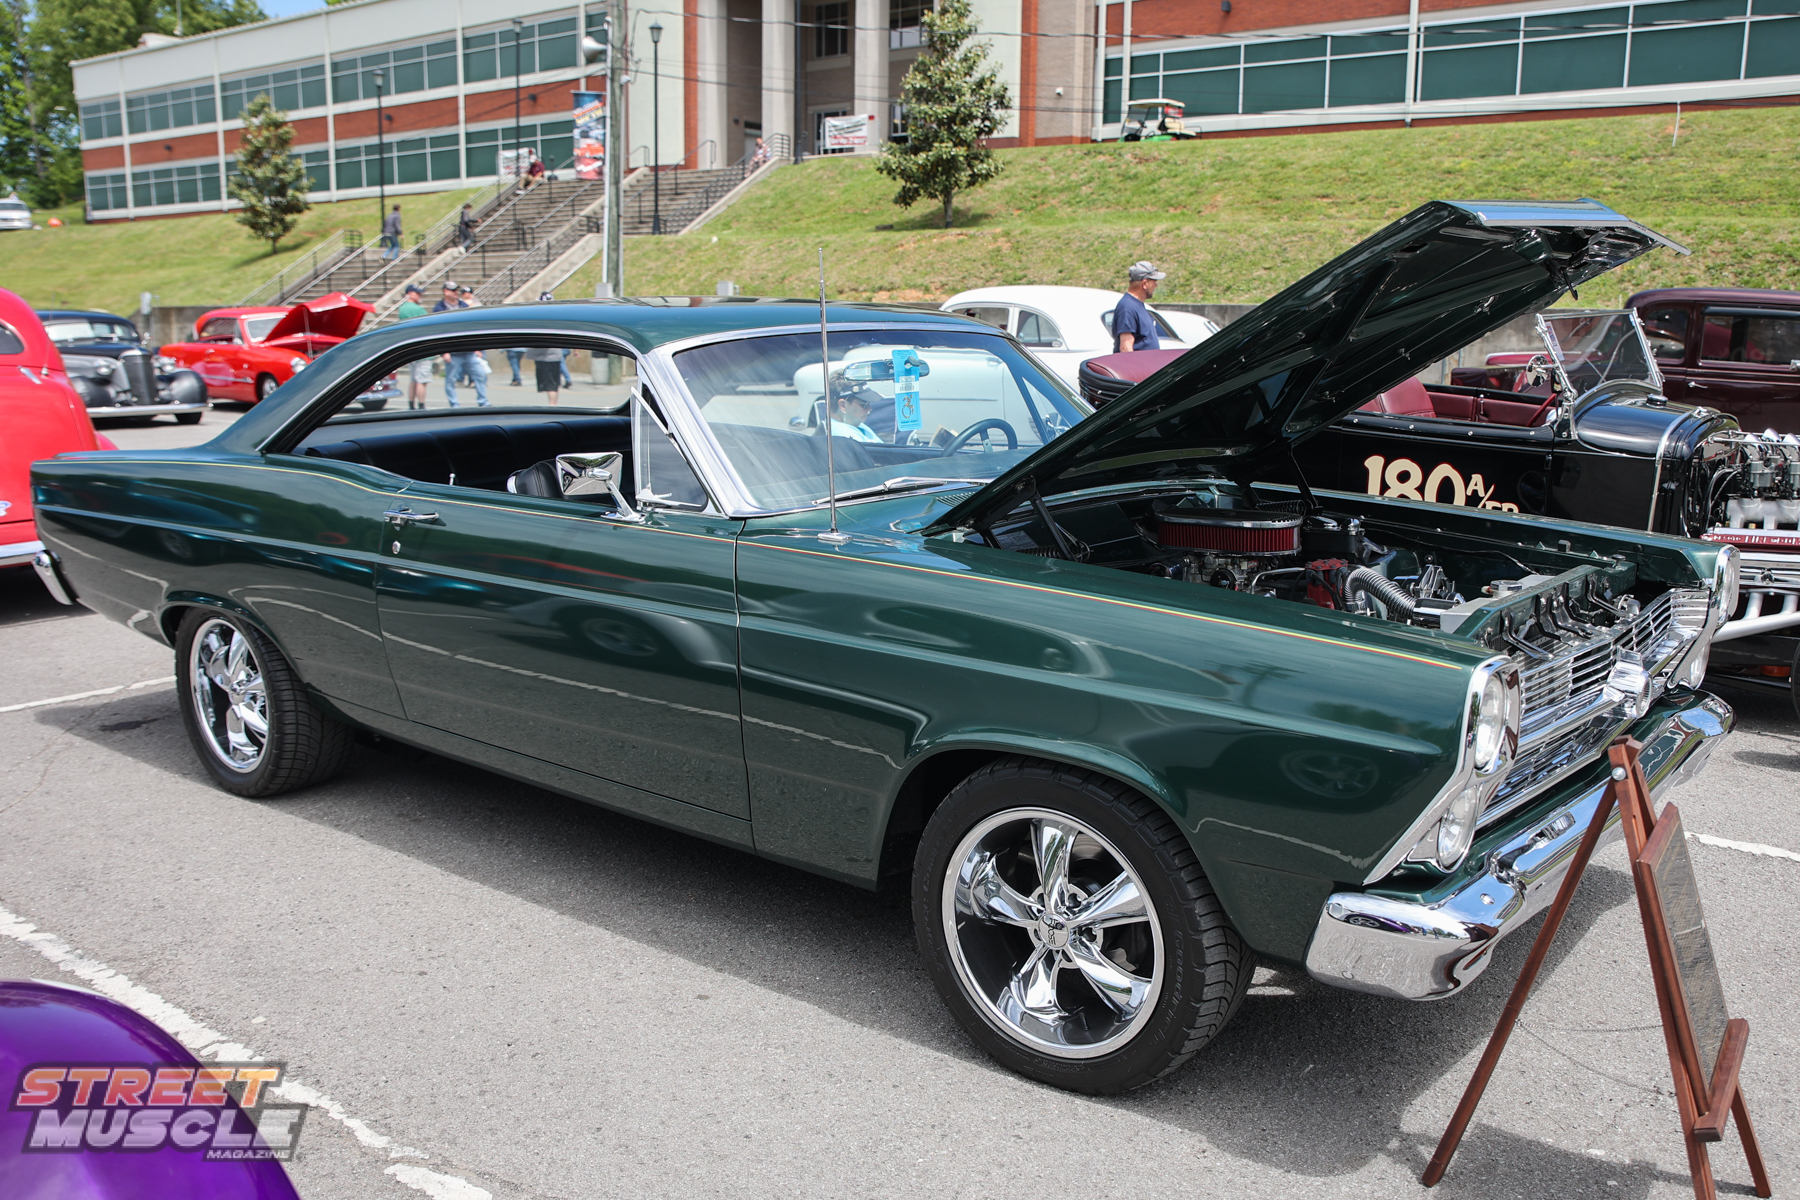 Event Coverage: The 49th Annual NSRA Street Rod Nationals South